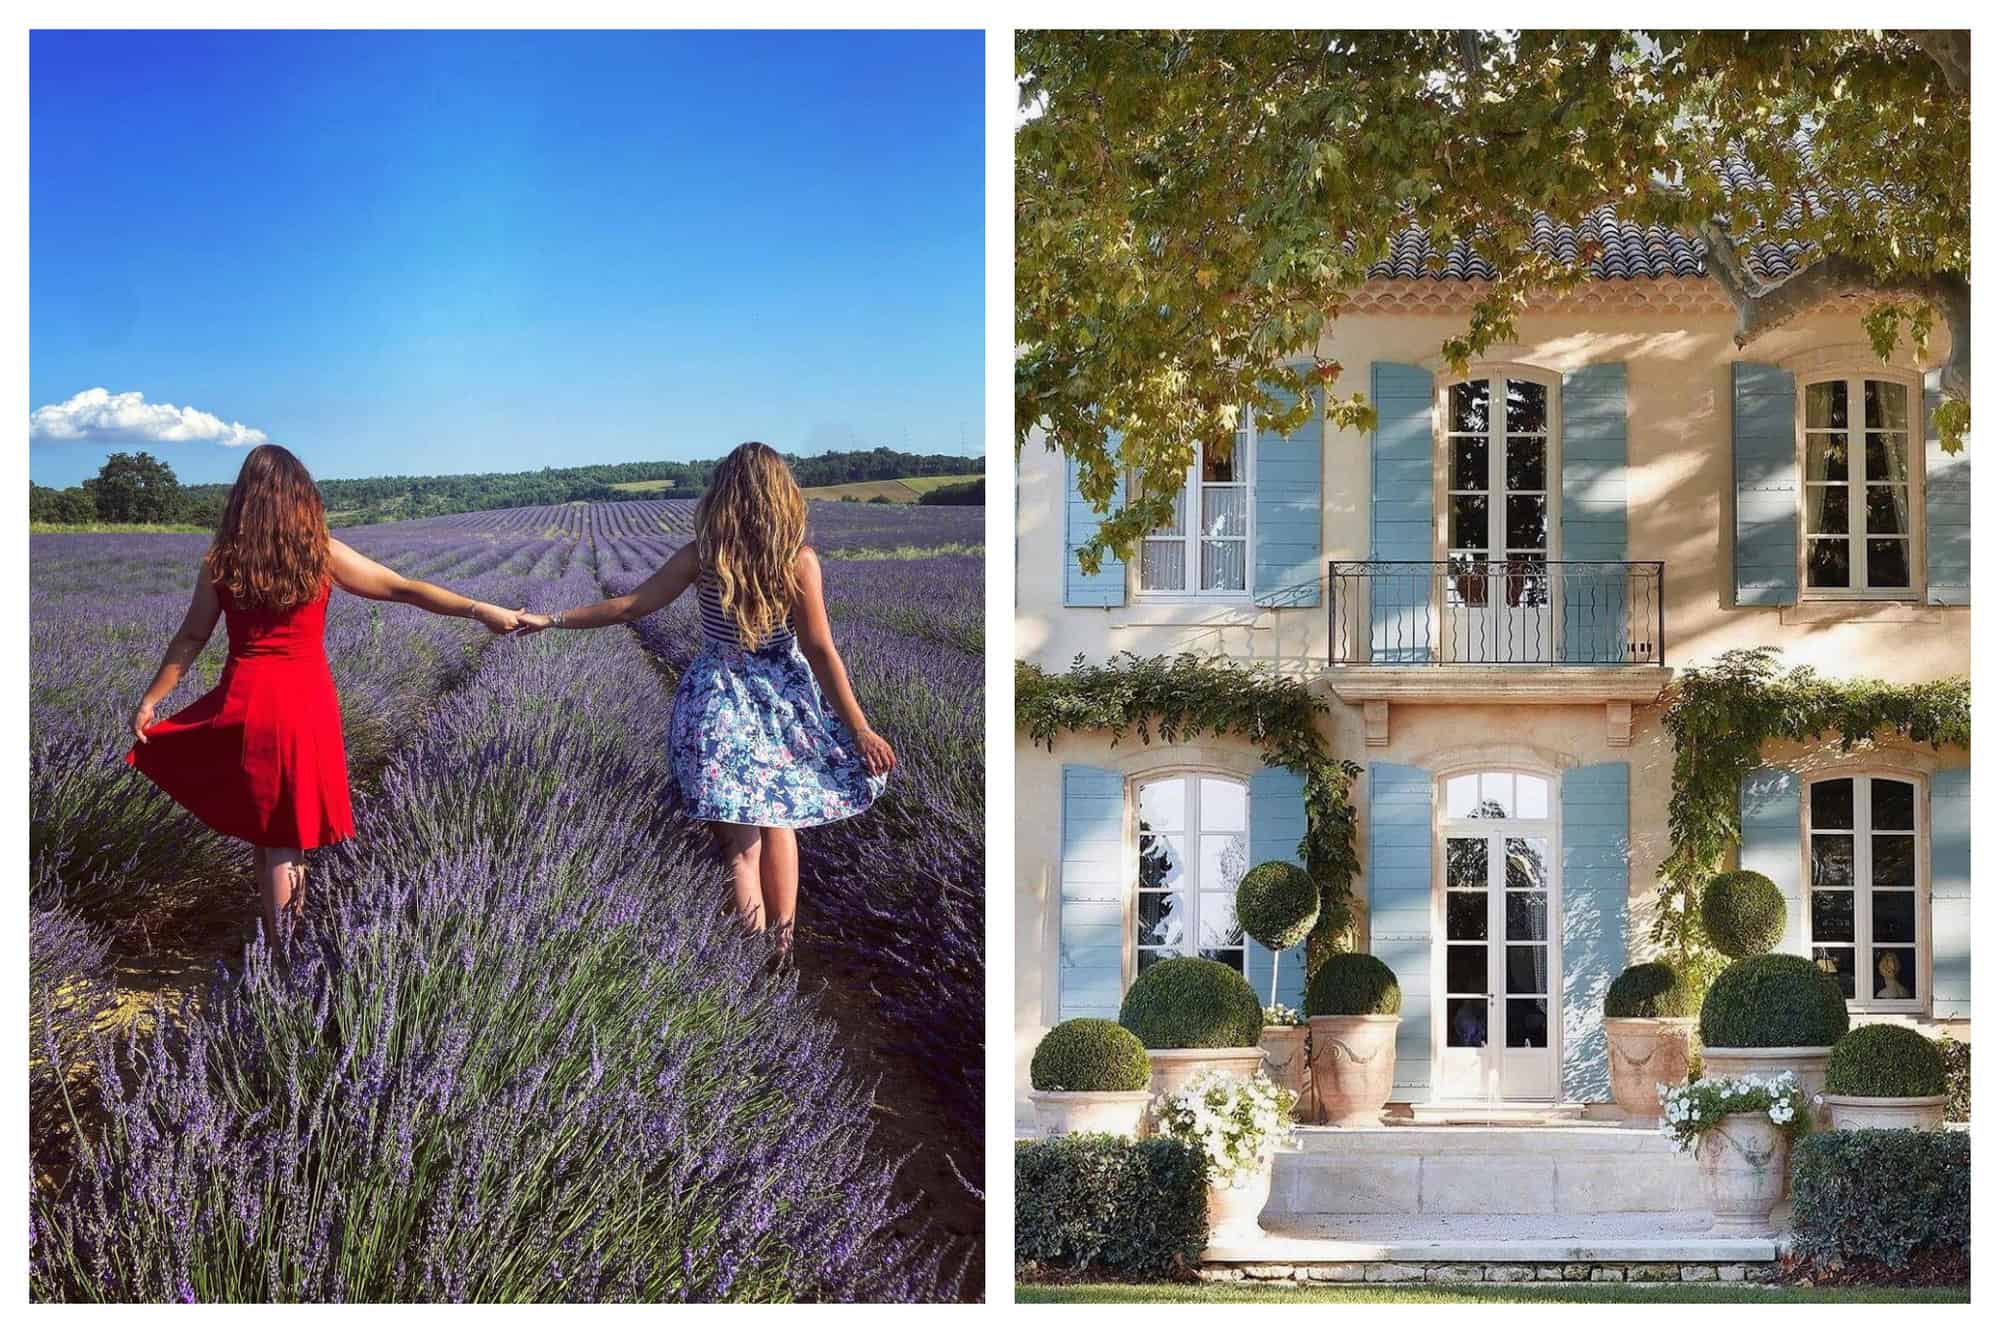 On the left: two girls, one in a red dress and the other wearing a blue printed dress, are walking in a field of lavender as they hold hands. On the right is an old provencal house painted in beige and is decorated with green shrubs and vines, light blue external windows, marbled tiles, and white french doors/windows.